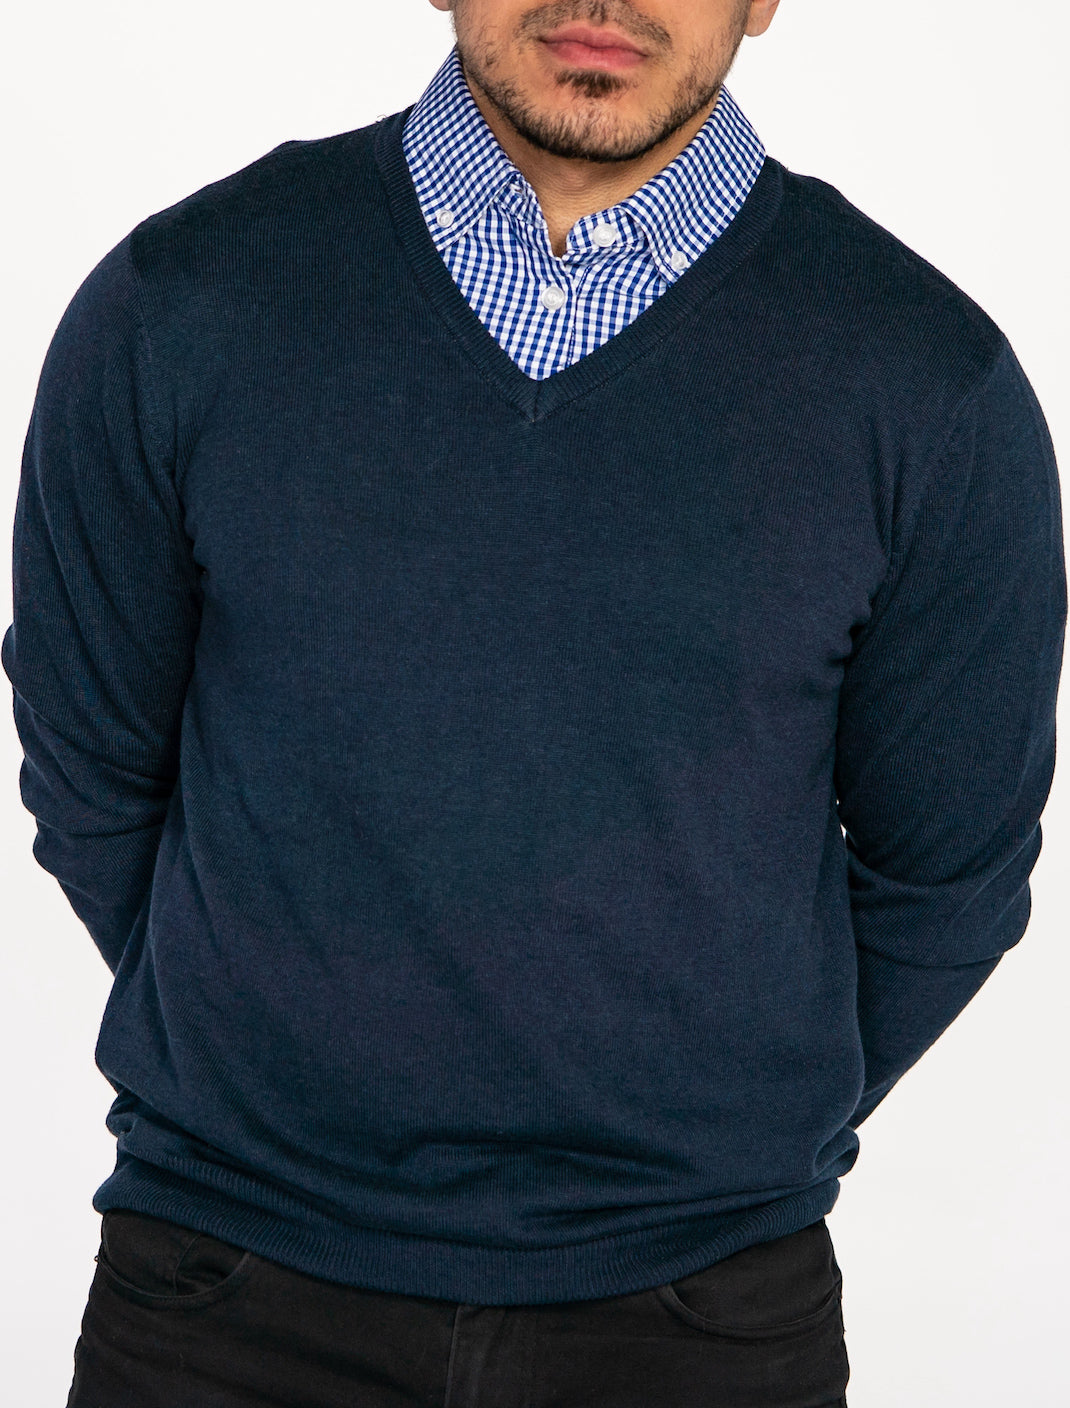 Sapphire Sweater with Blue Gingham Collared Shirt